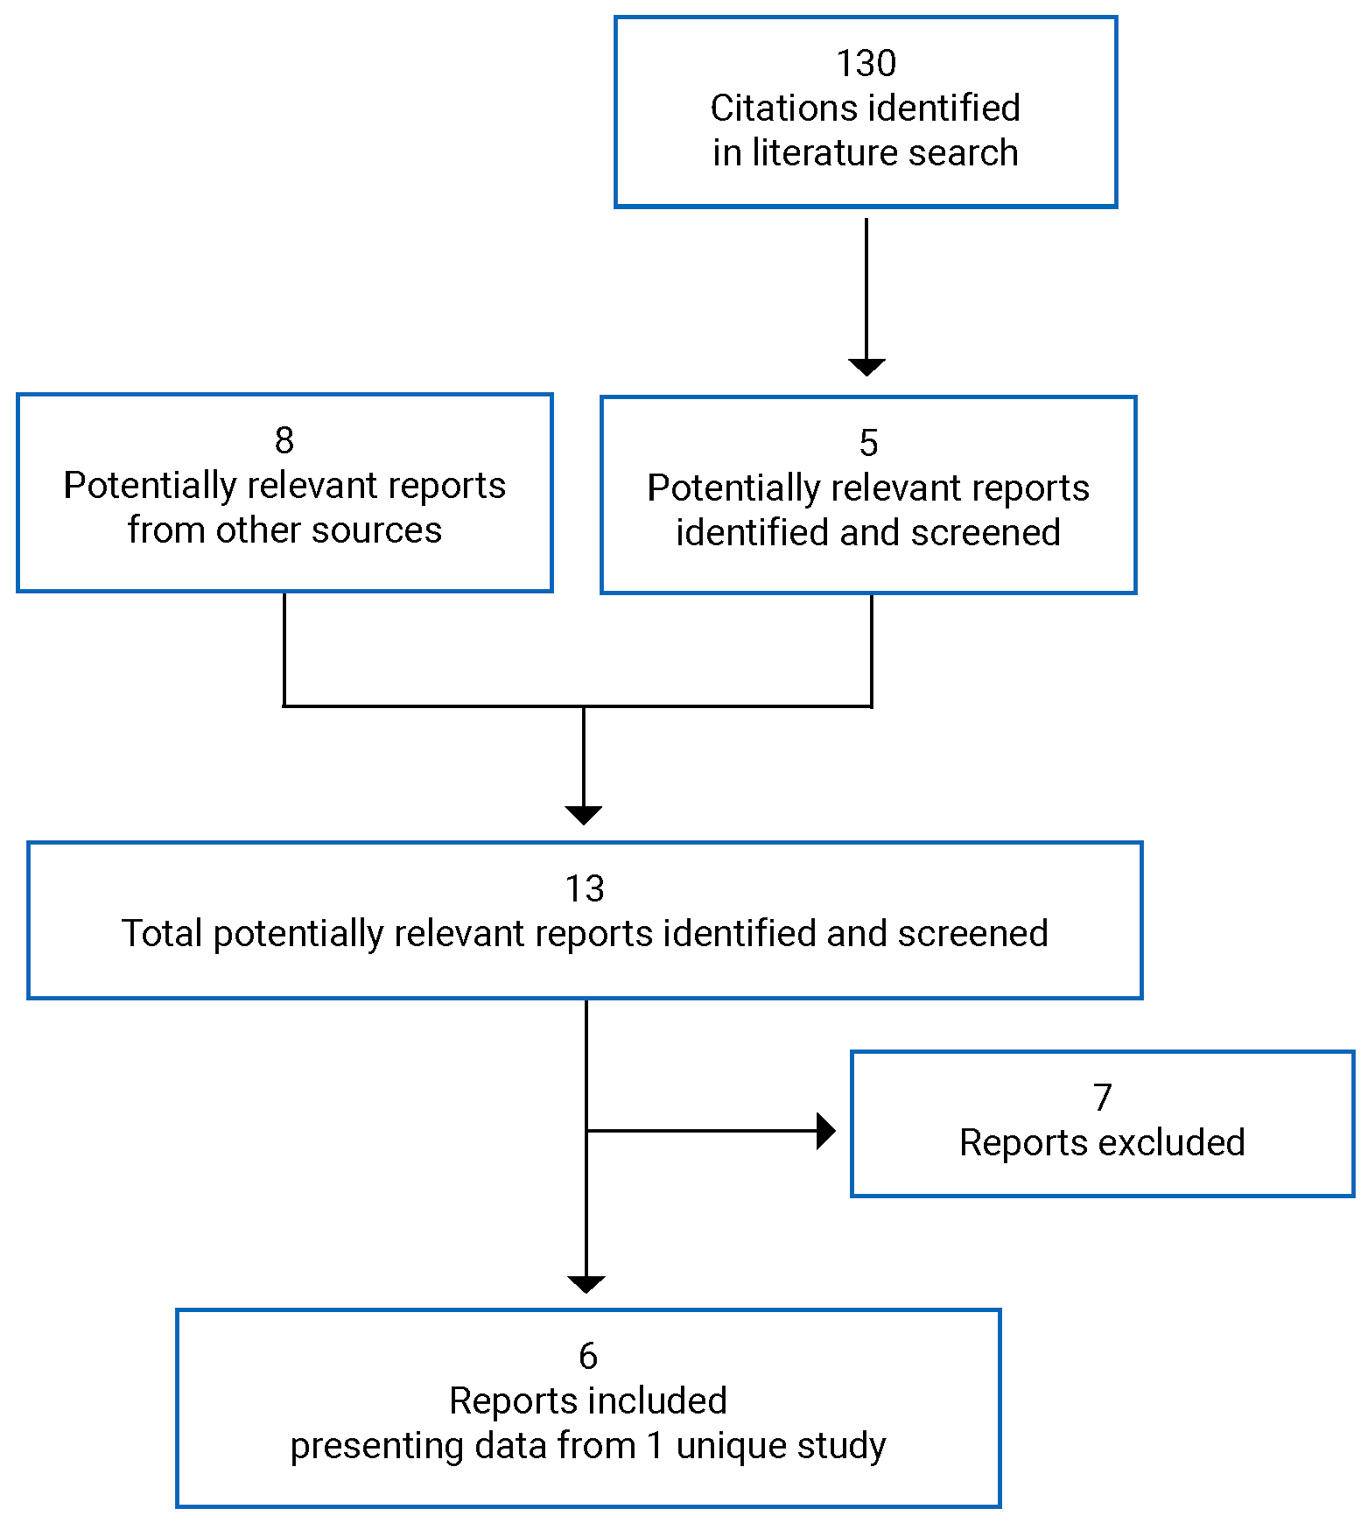 130 citations were initially identified and 125 were excluded, while 8 additional potentially relevant reports were retrieved for scrutiny, resulting in a total of 13 reports screened in full text; 7 of these were excluded and 6 were included in the review. These 6 reports represent 1 single study (LIBRETTO001).